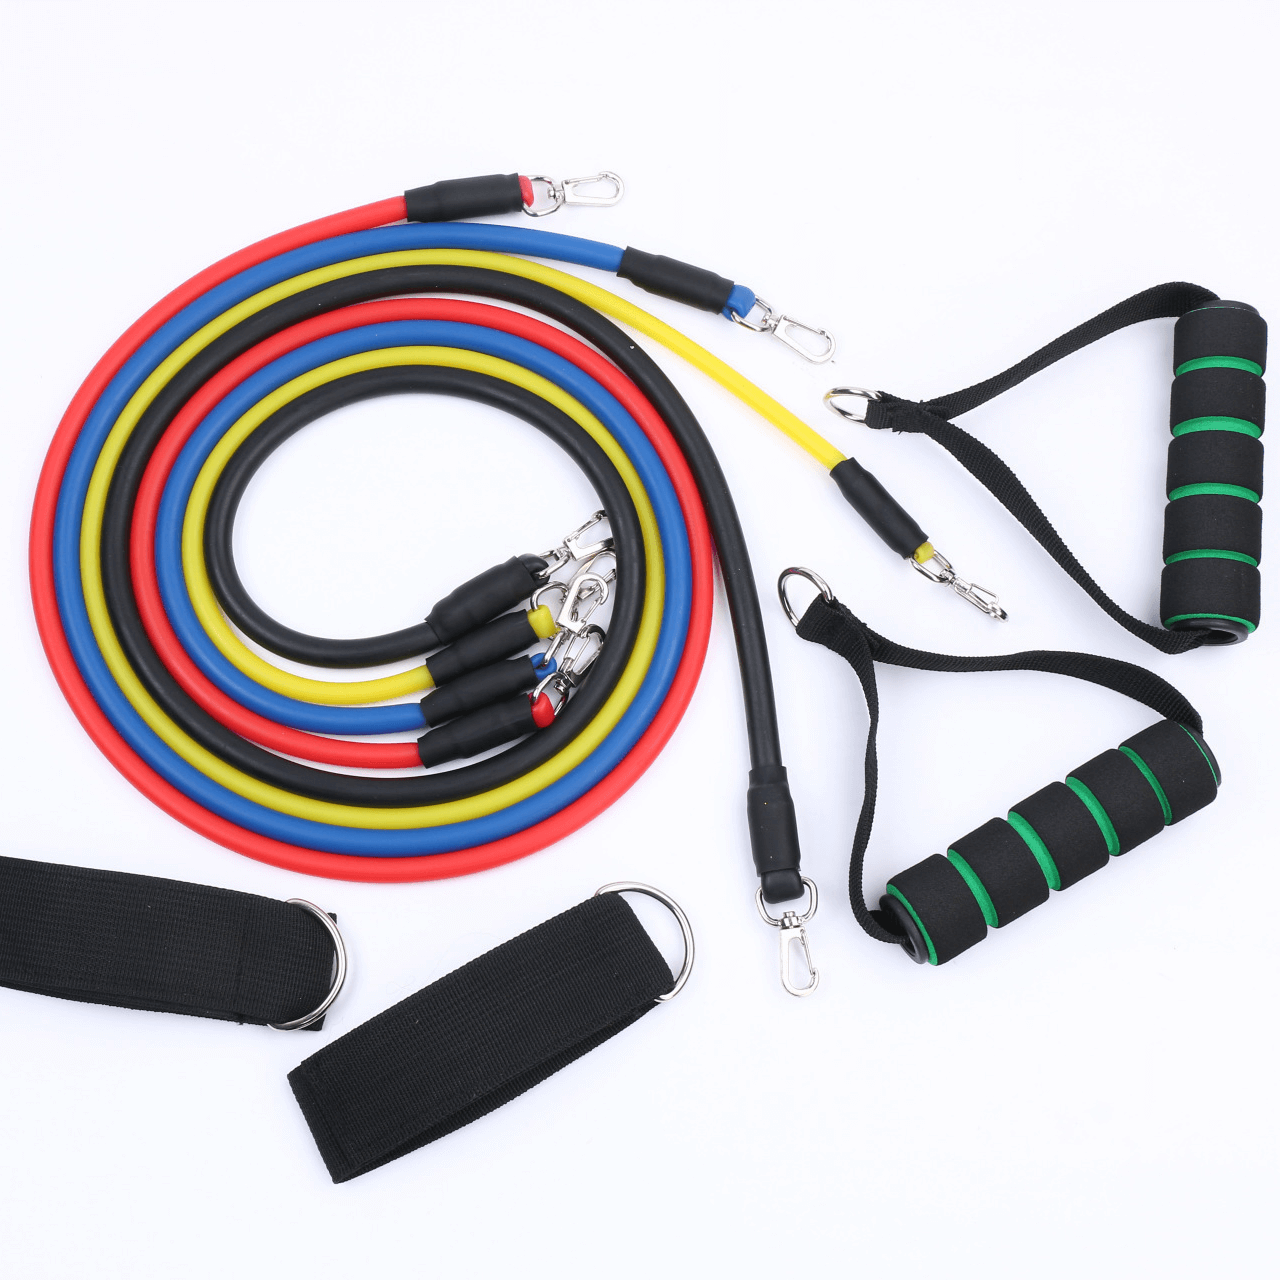 What Are Resistance Bands Good For